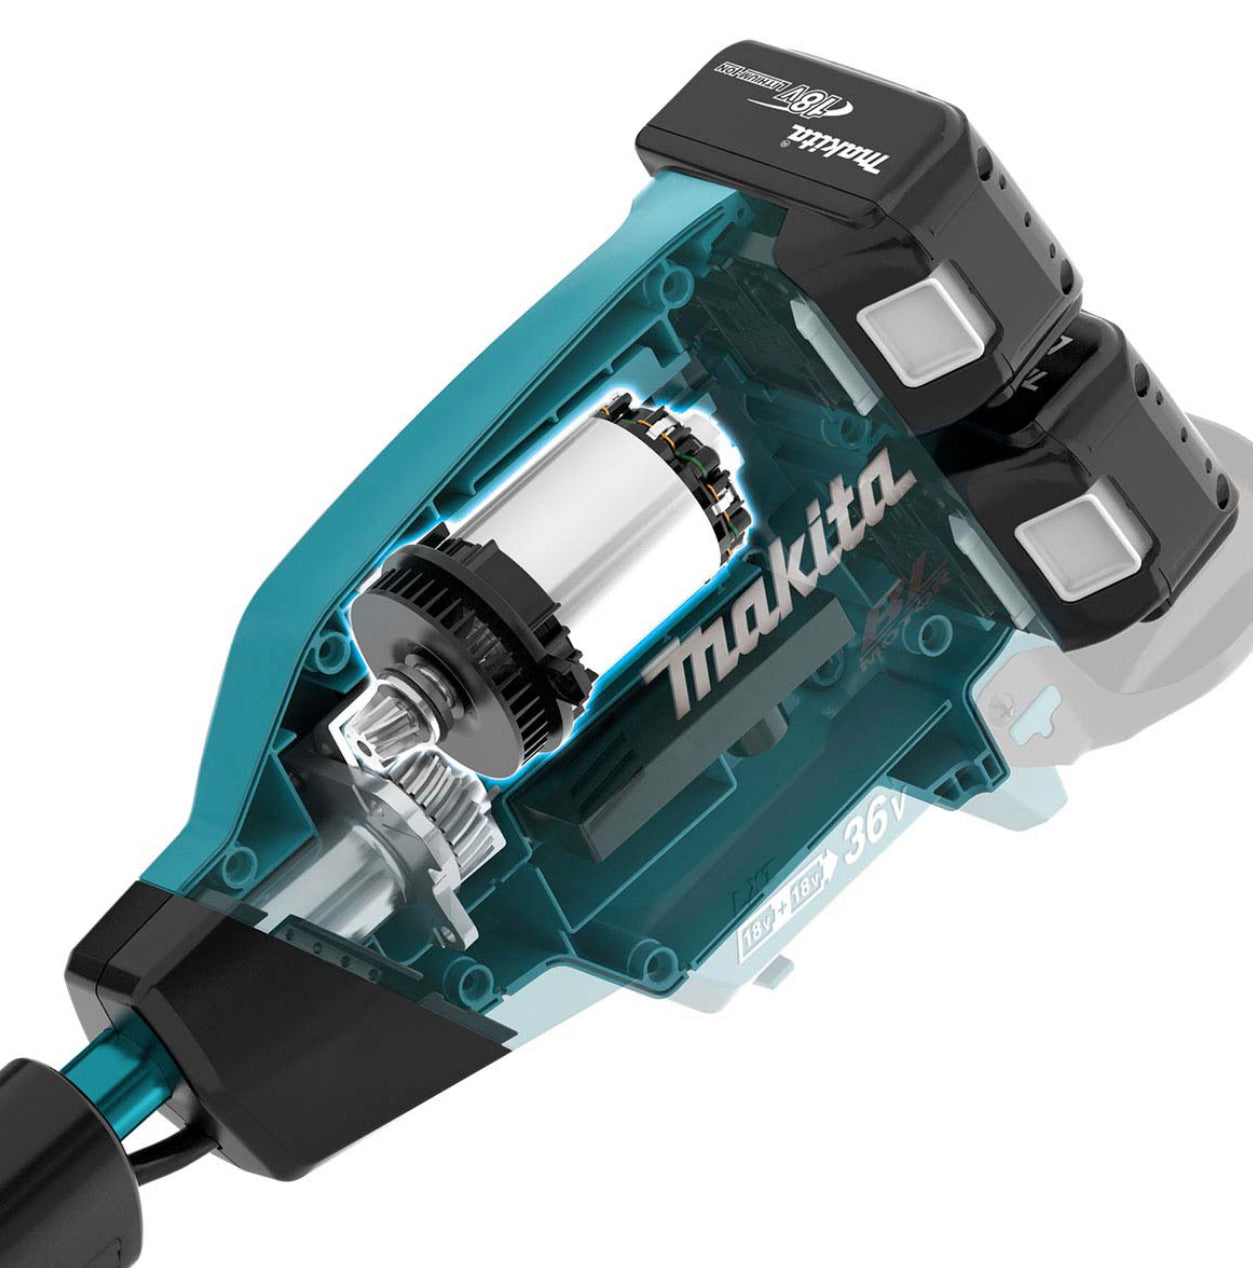 18Vx2 Brushless Loop Handle Line Trimmer Bare (Tool Only) DUR369LZ by Makita